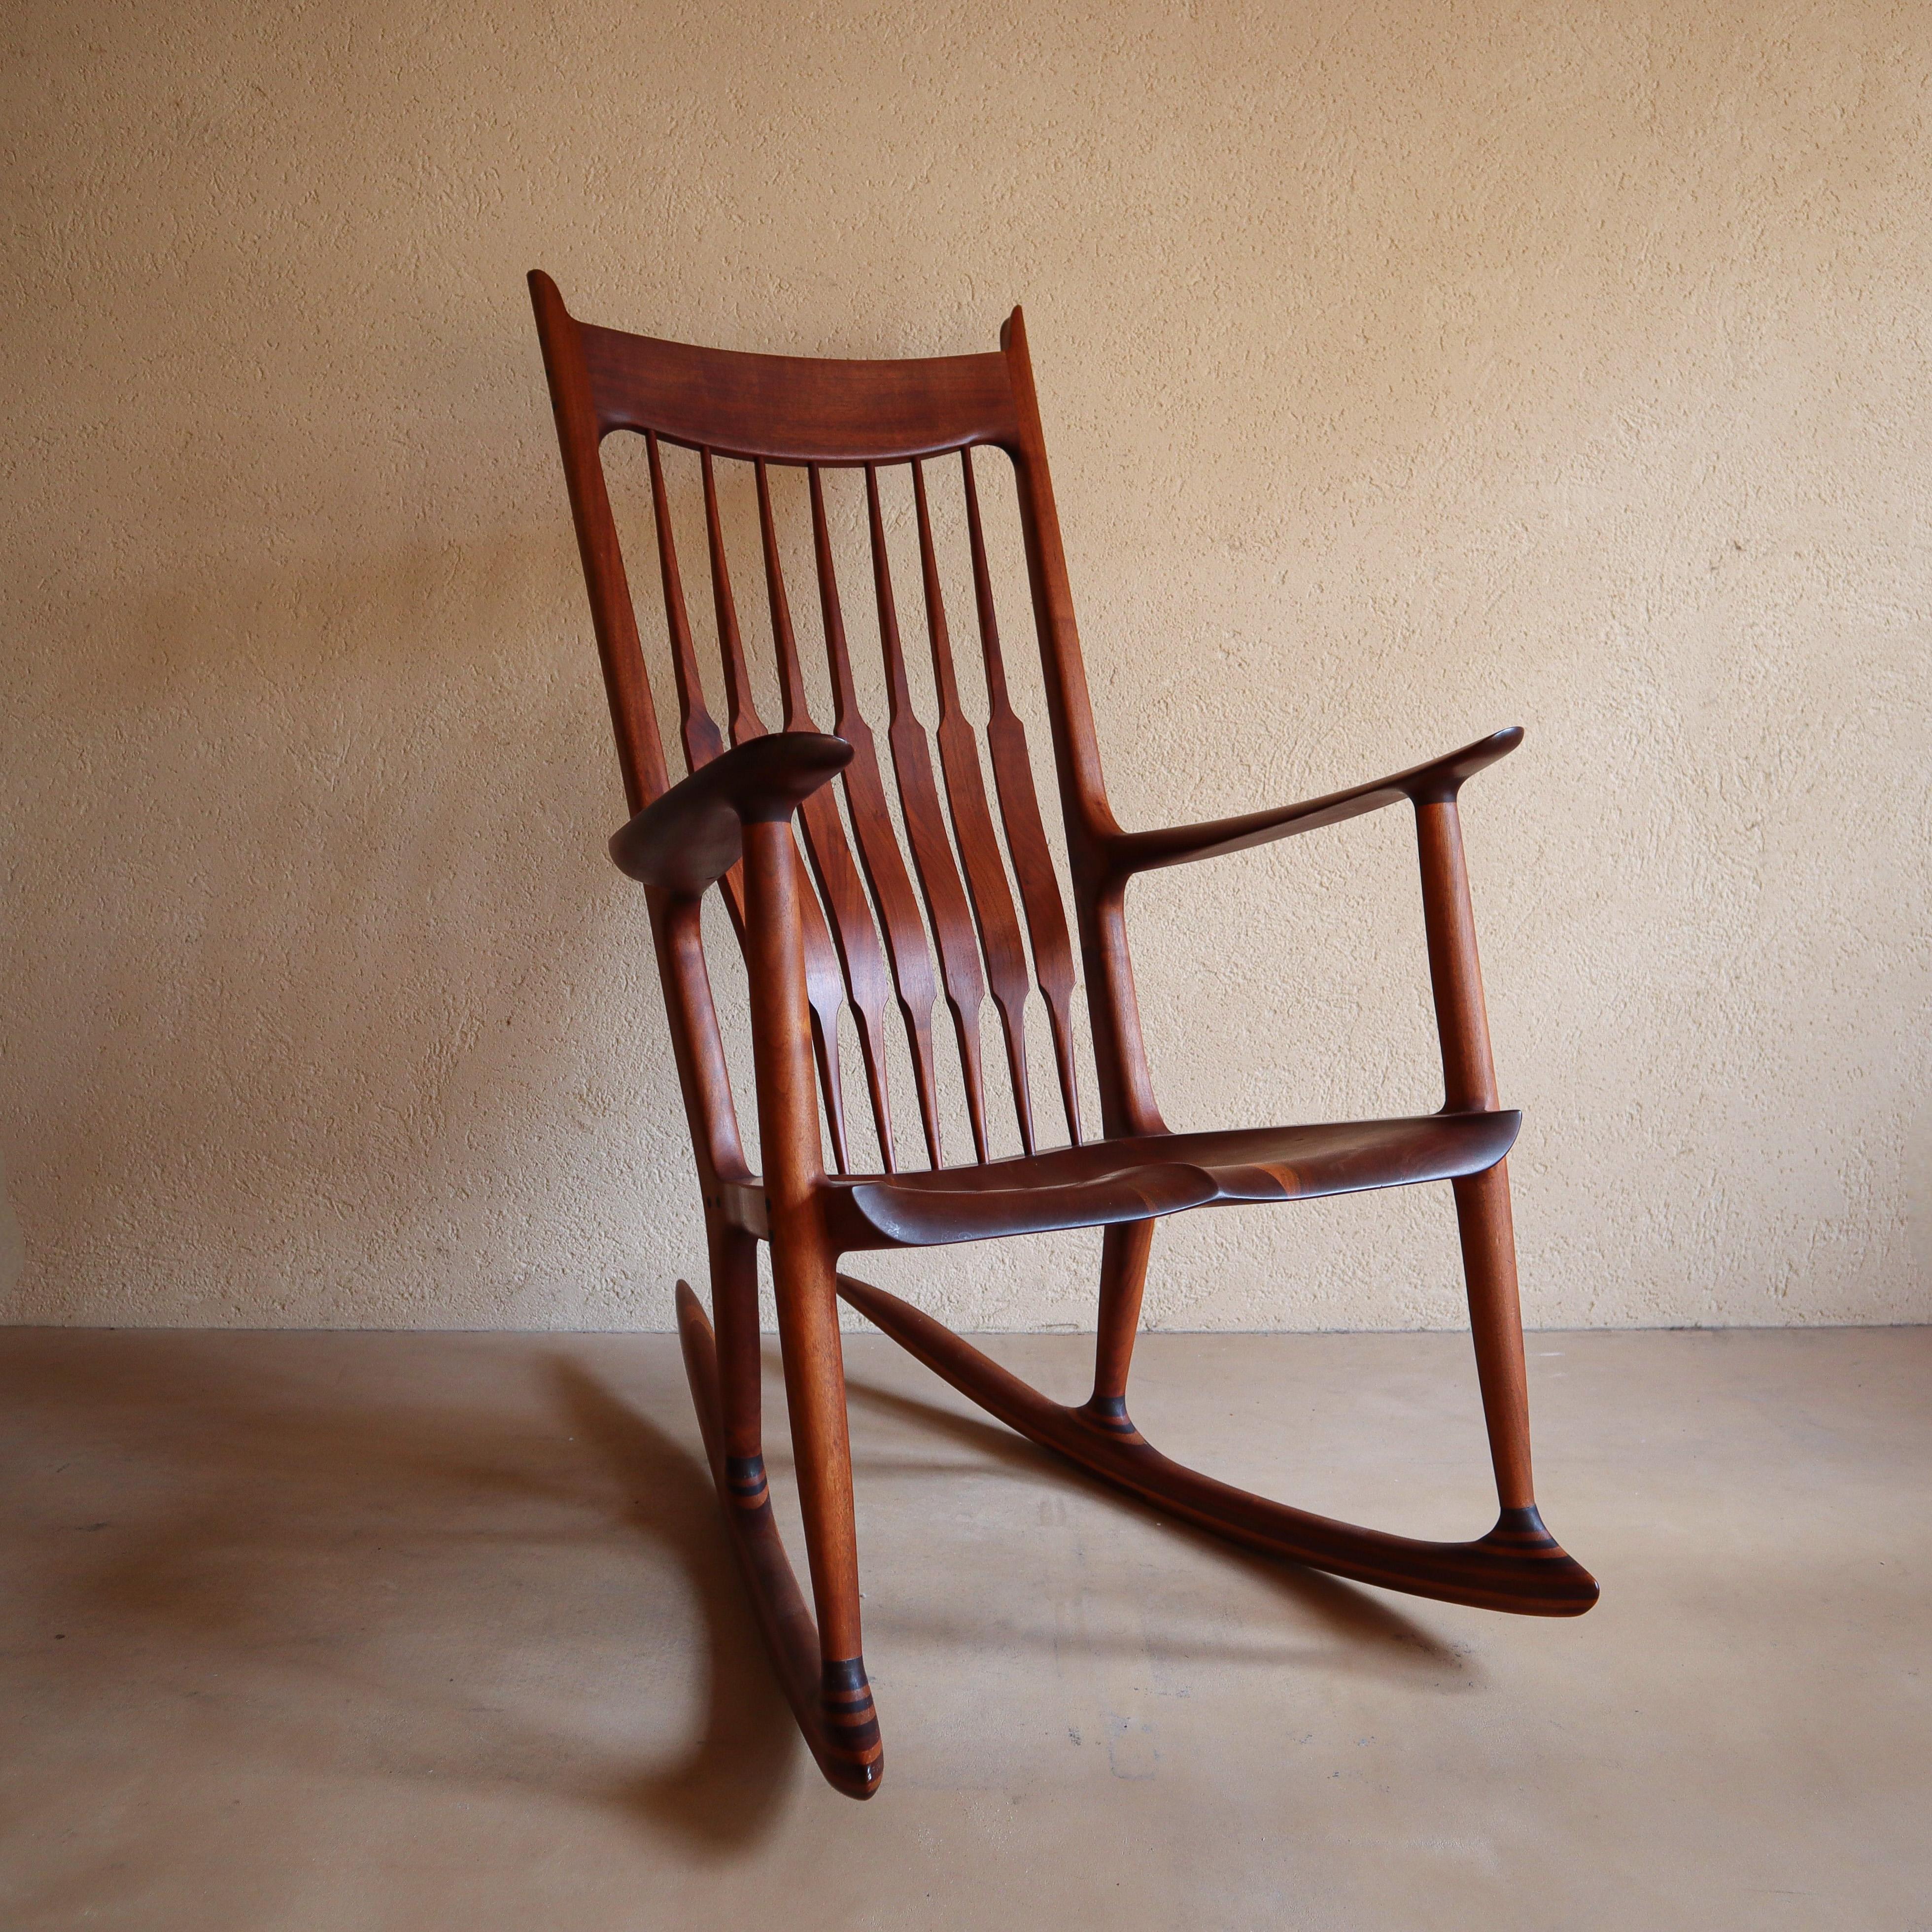 Handcrafted solid wood rocking chair in the manner of Sam Maloof. The level of attention to detail and craftsmanship suggest this was built by an expert craftsman.

Material: Solid Walnut 

Dimensions:

H 1132mm

W 602mm

D